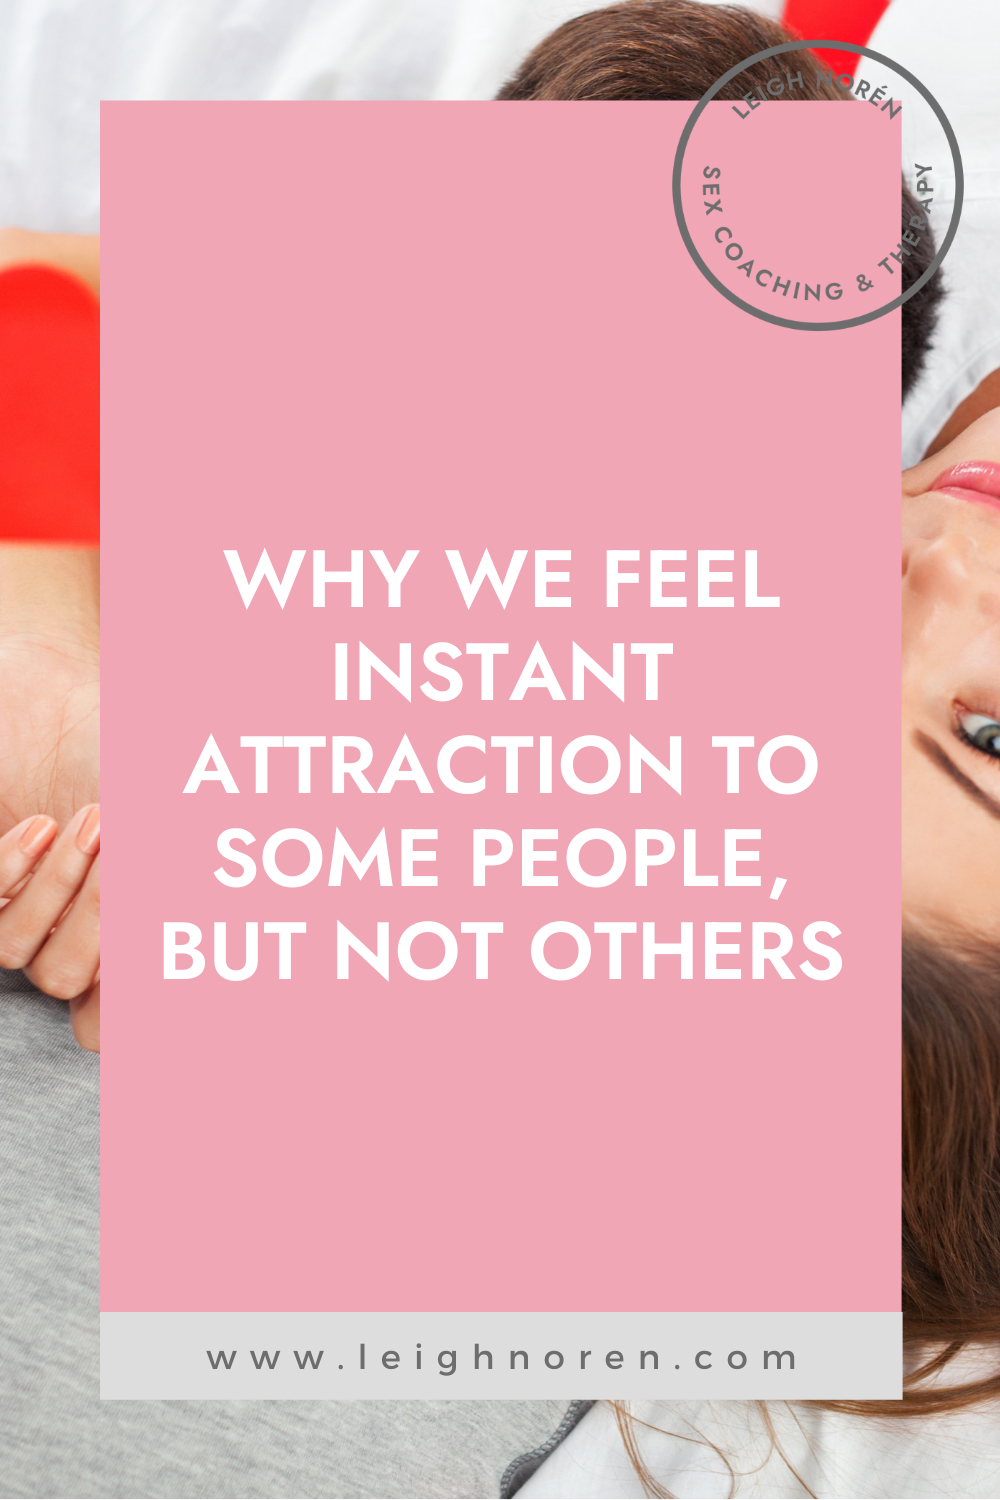 Why We Feel Instant Attraction To Some People, But Not Others